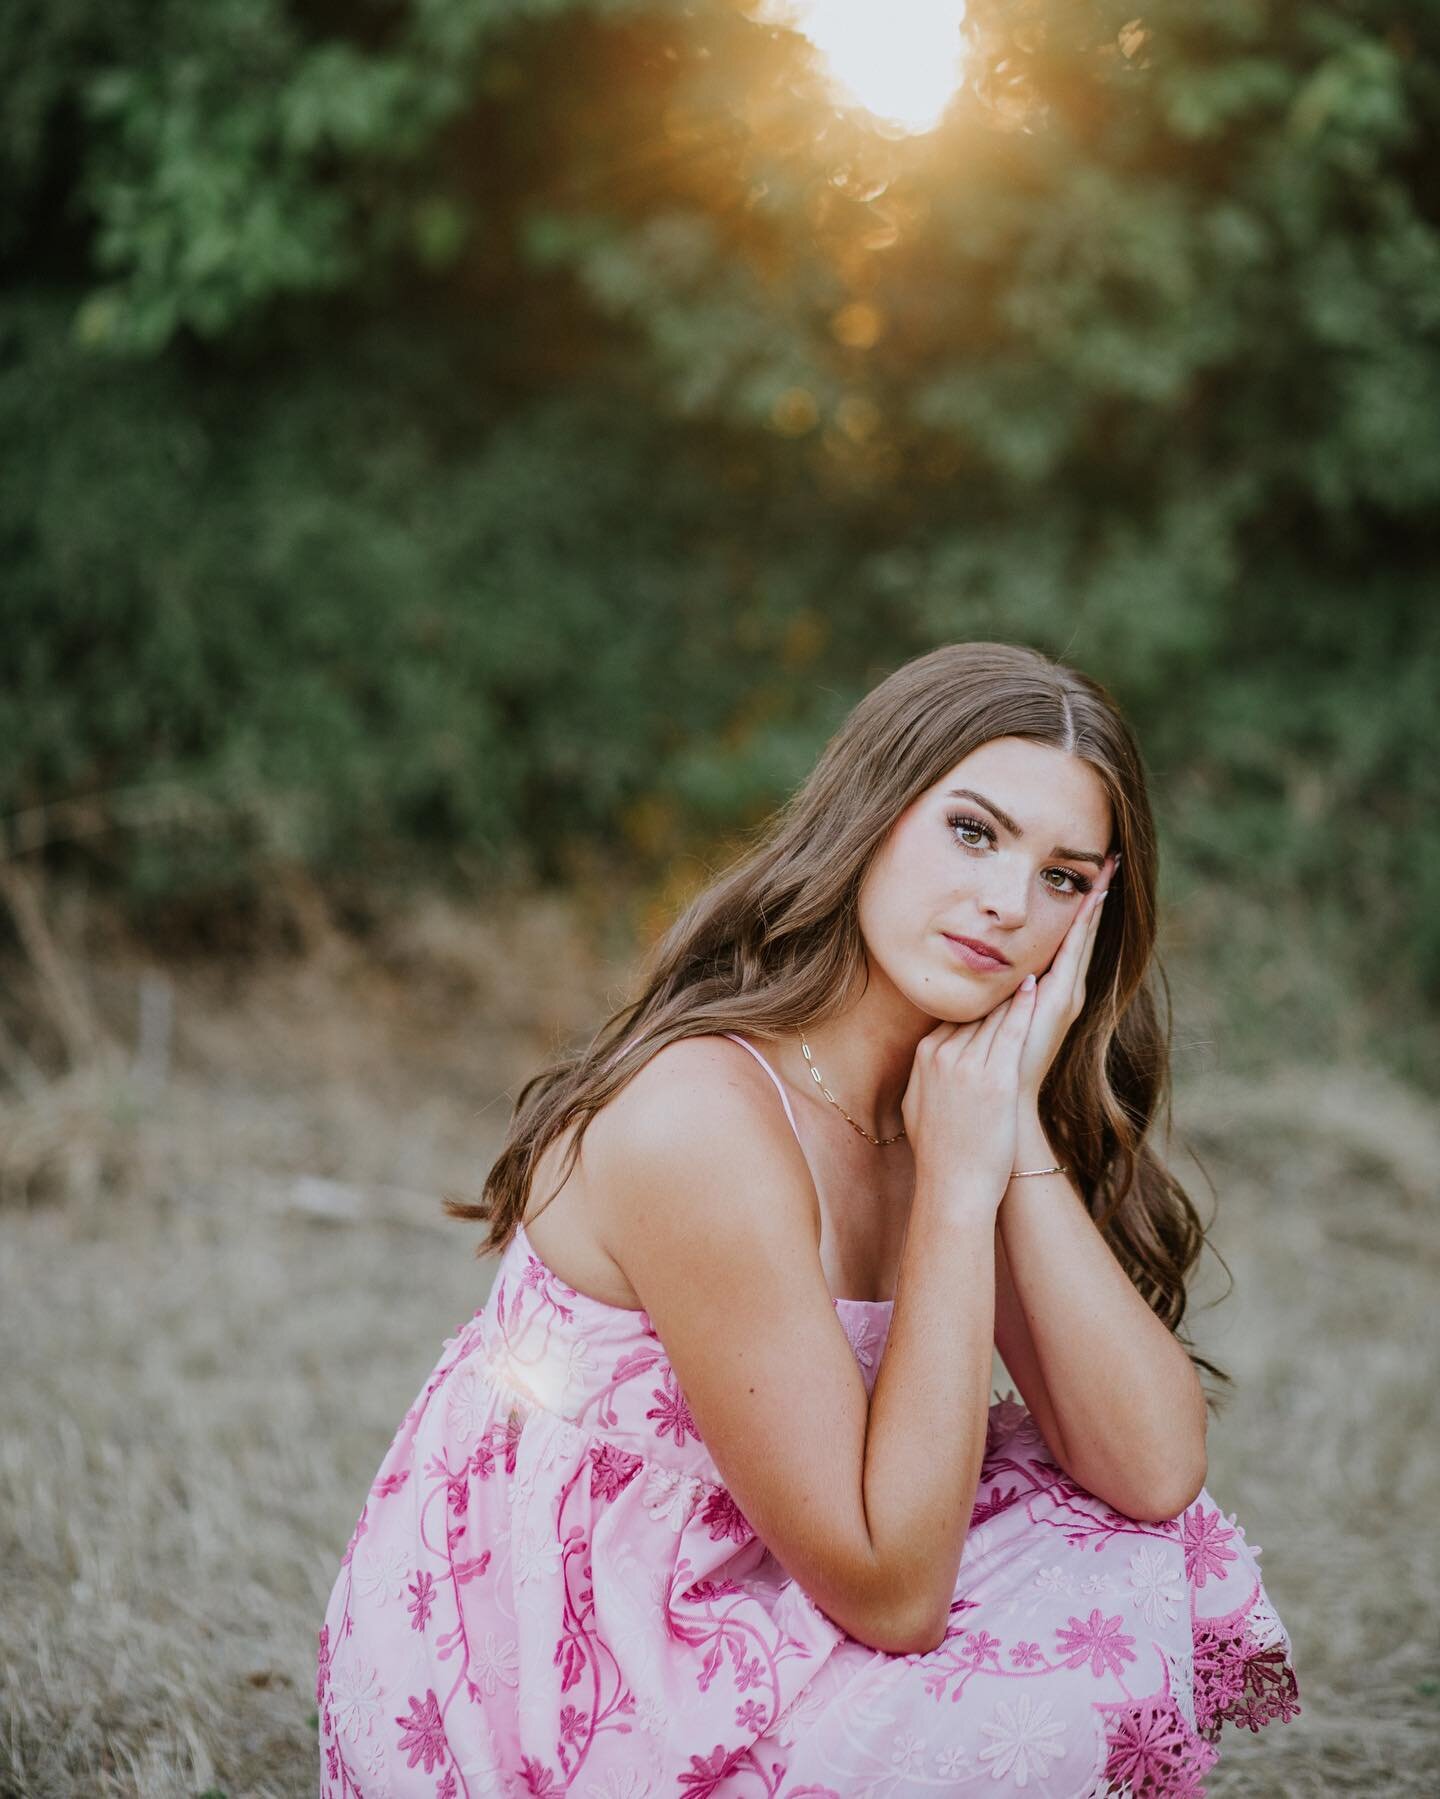 Now booking spring photos for class of 2024!! Tap BOOK NOW to book your session! #calliebethphoto #springsenior #seniorclass2024 #classof2024  #byronnelsonhighschool #rockwallhighschool #rockwallphotographer #roanokephotographer